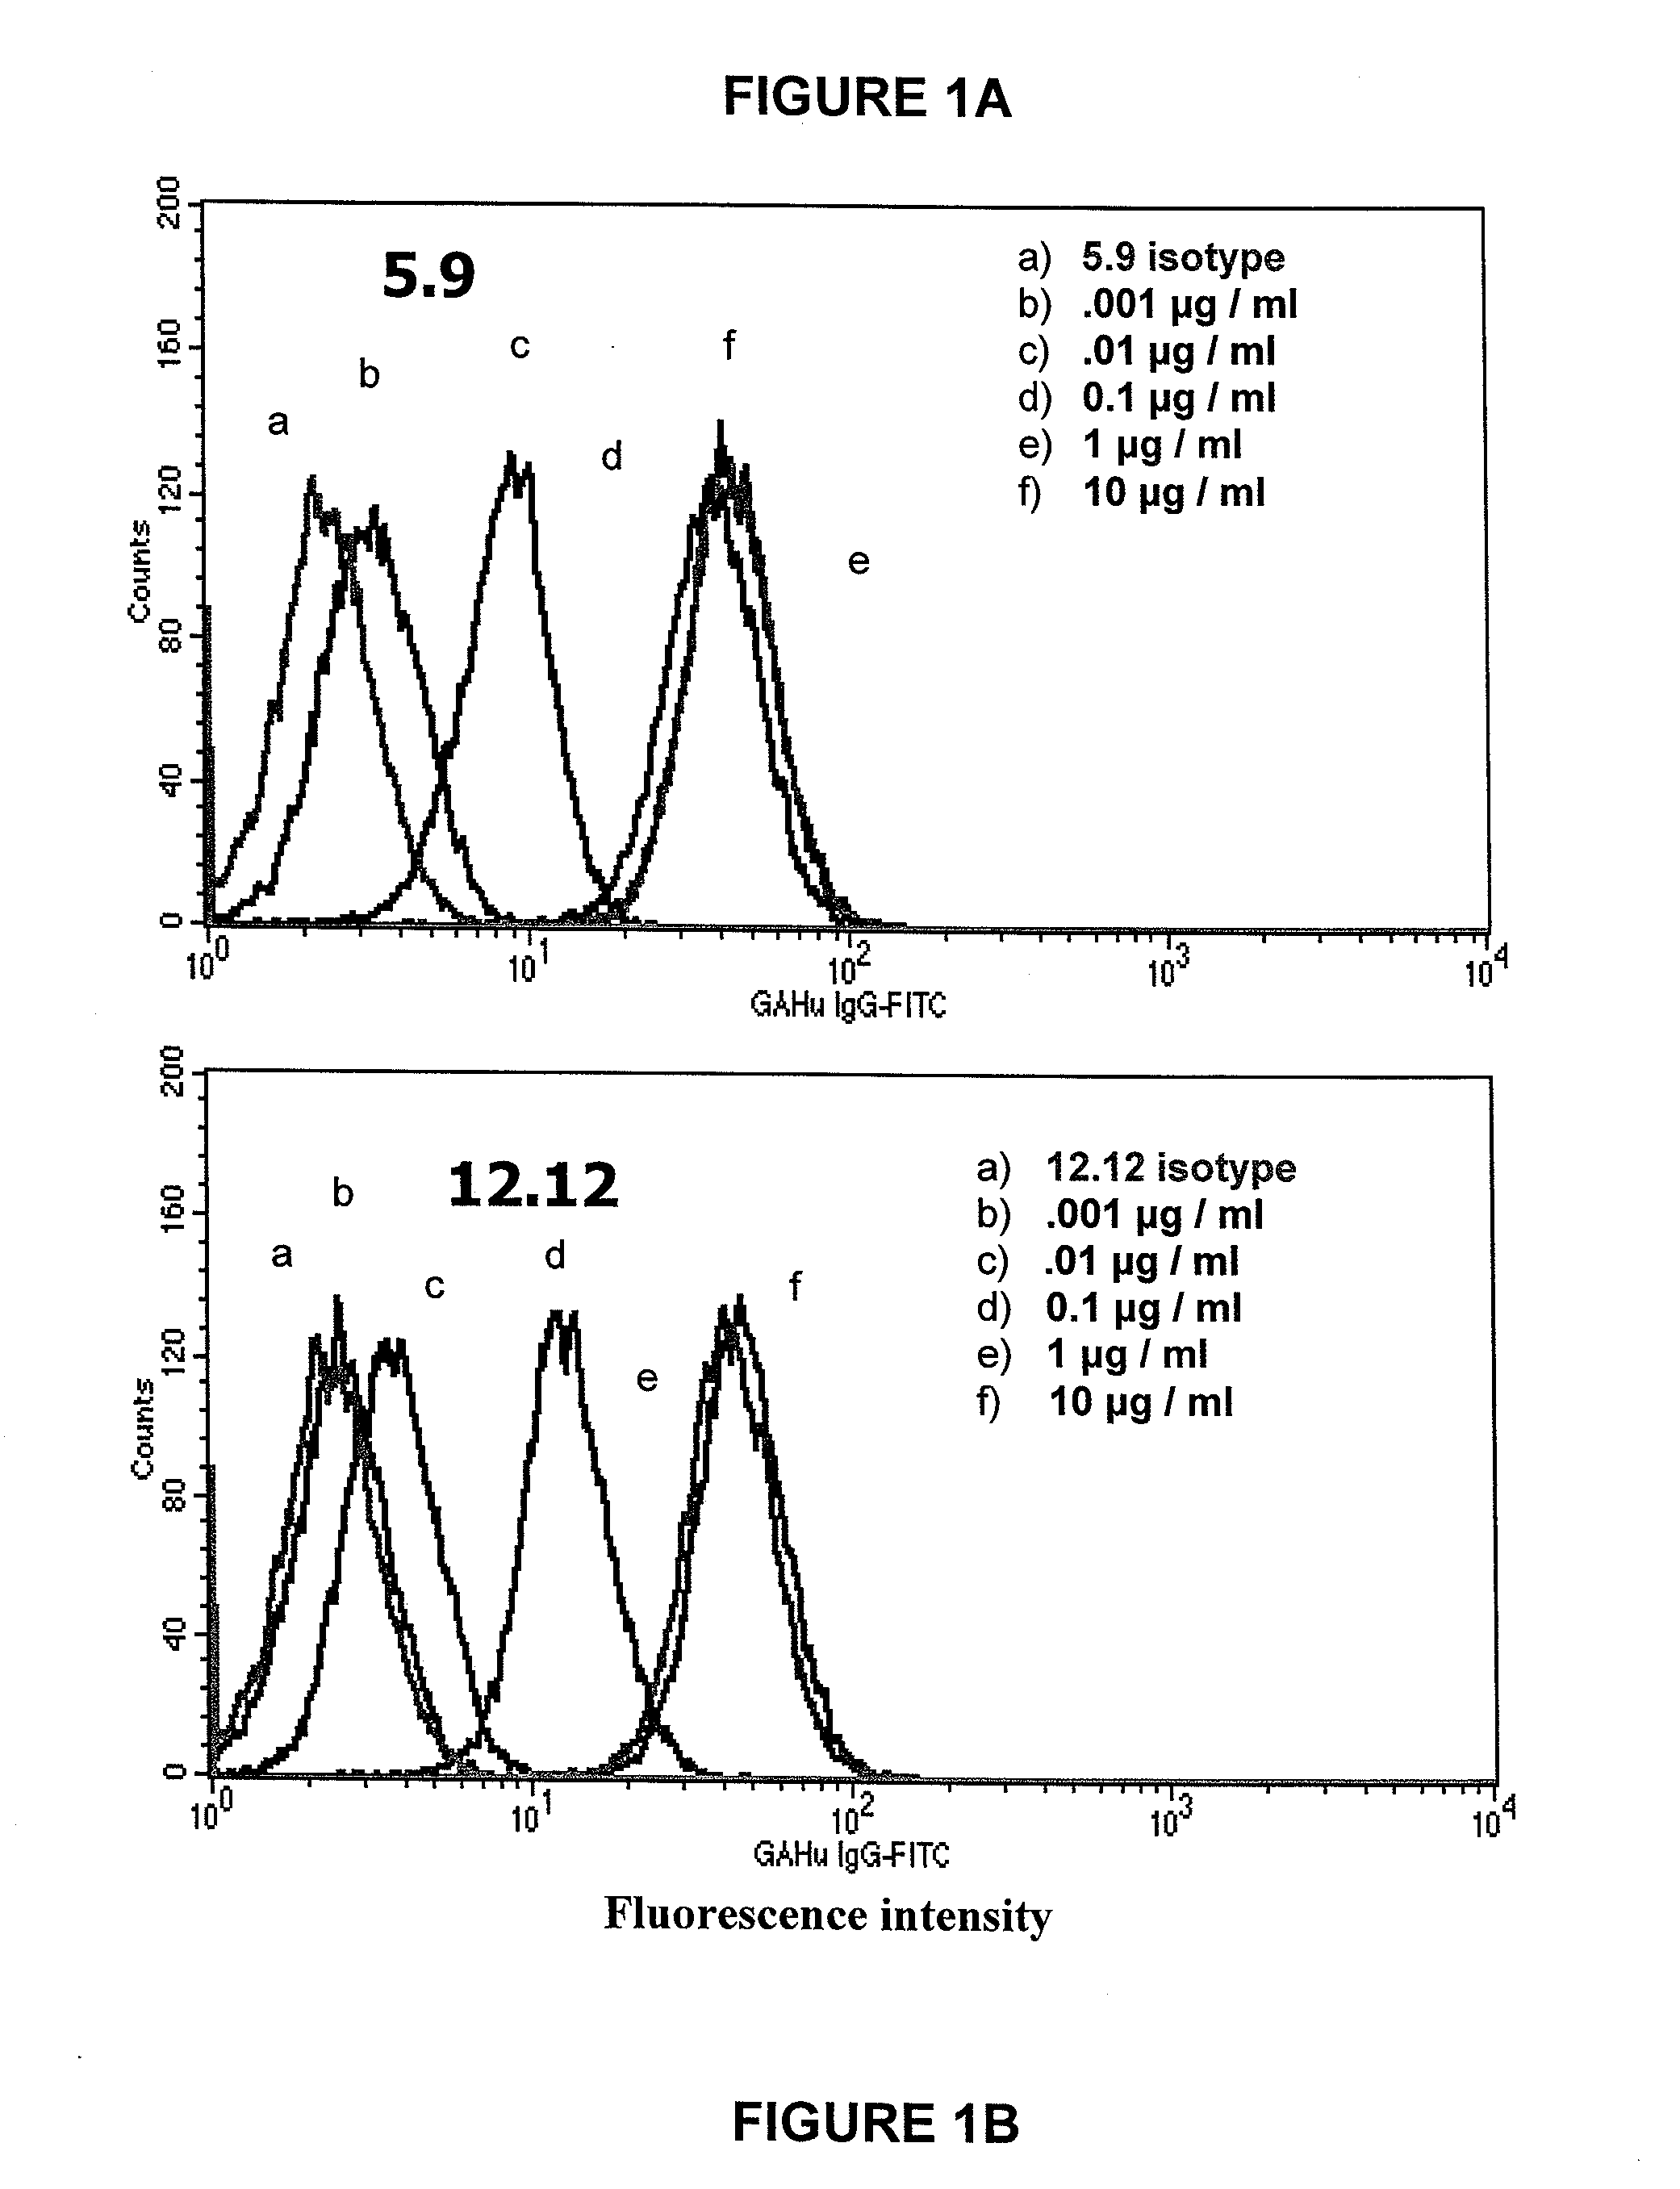 Antagonist Anti-cd40 monoclonal antibodies and methods for their use